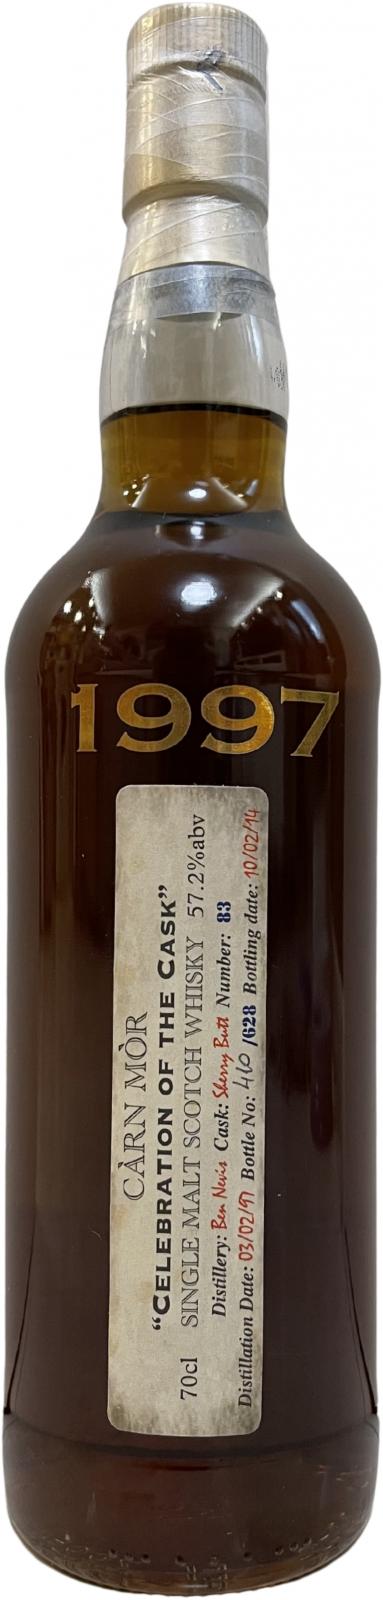 Ben Nevis 1997 Cm Ratings And Reviews Whiskybase